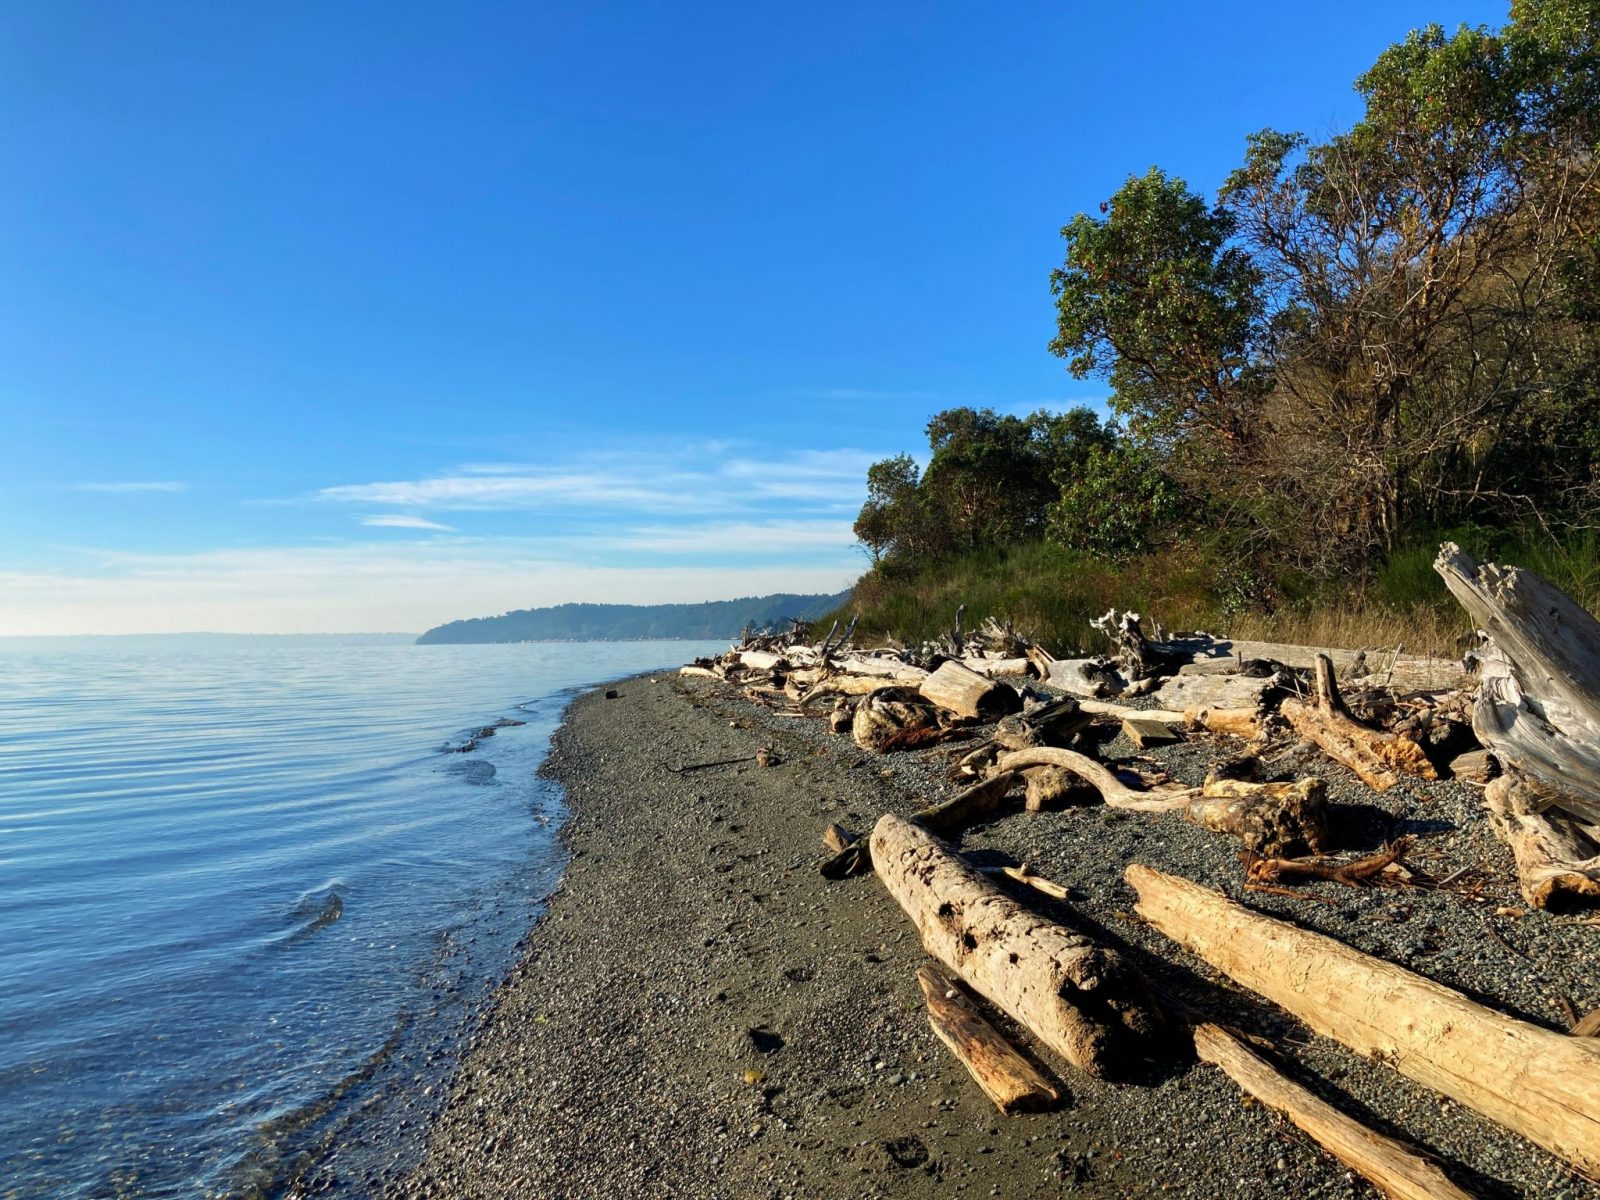 A gravel beach on a Vashon Island Hiking trail in Maury Island Marine park. There is driftwood on the beach and trees behind it on the right. To the left is the calm water of the Salish Sea. A distant island is visible in the background. It's a sunny day.